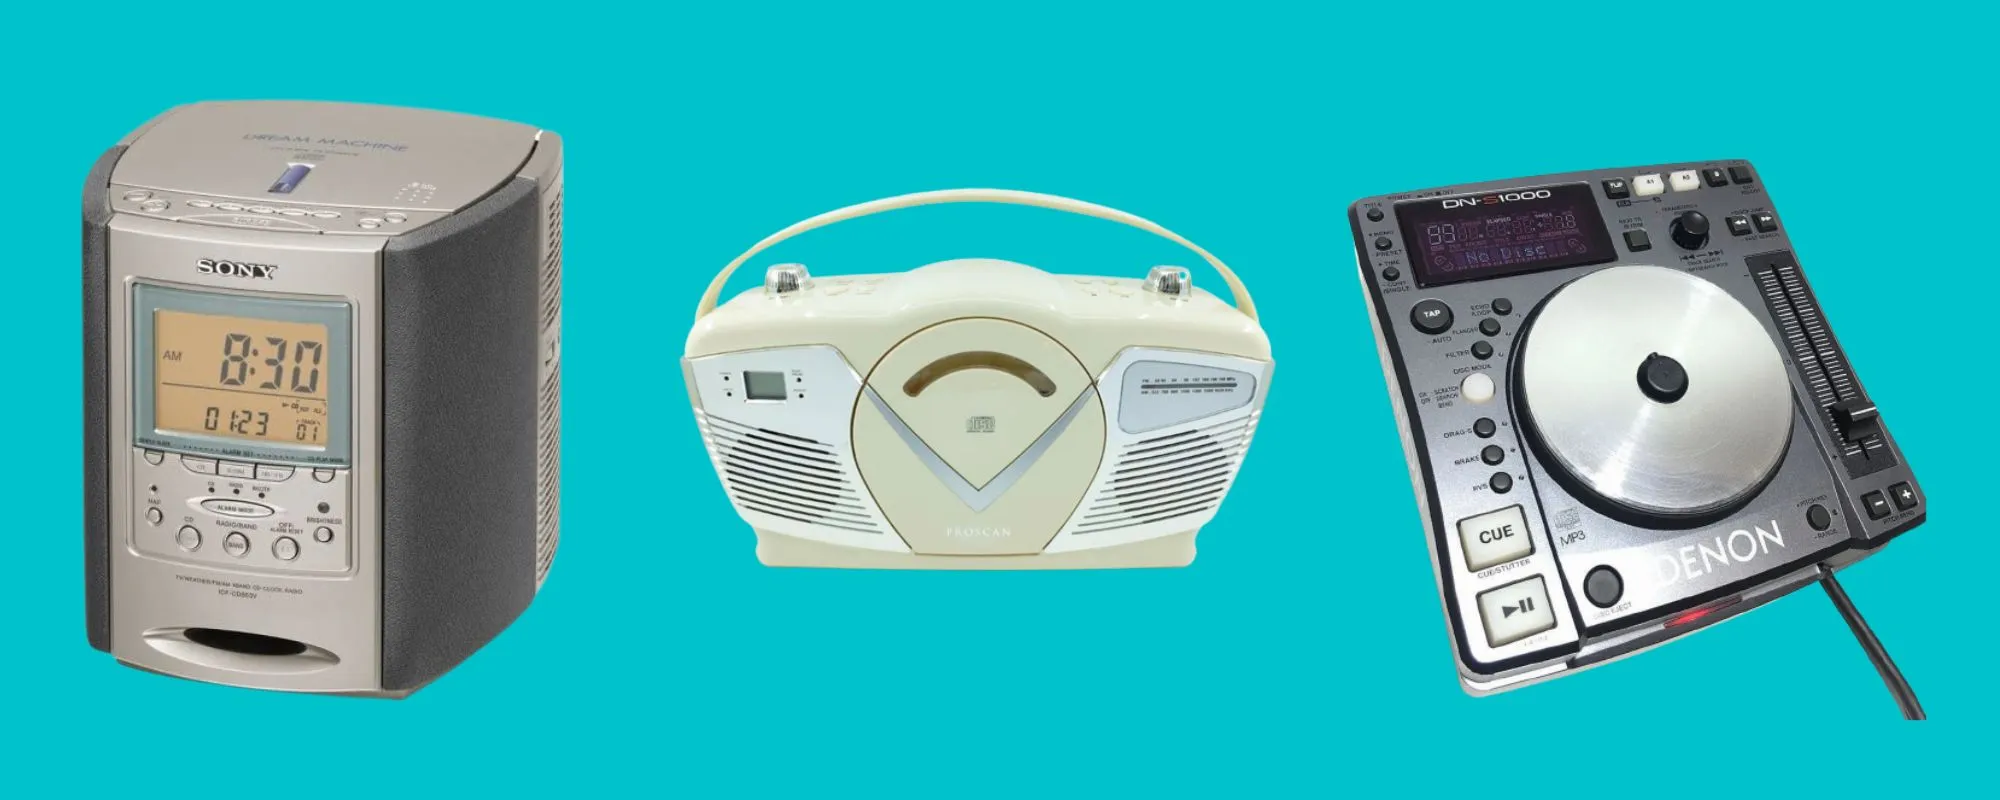 Radio: Enjoying a blast from the past with these old consoles – Daily News